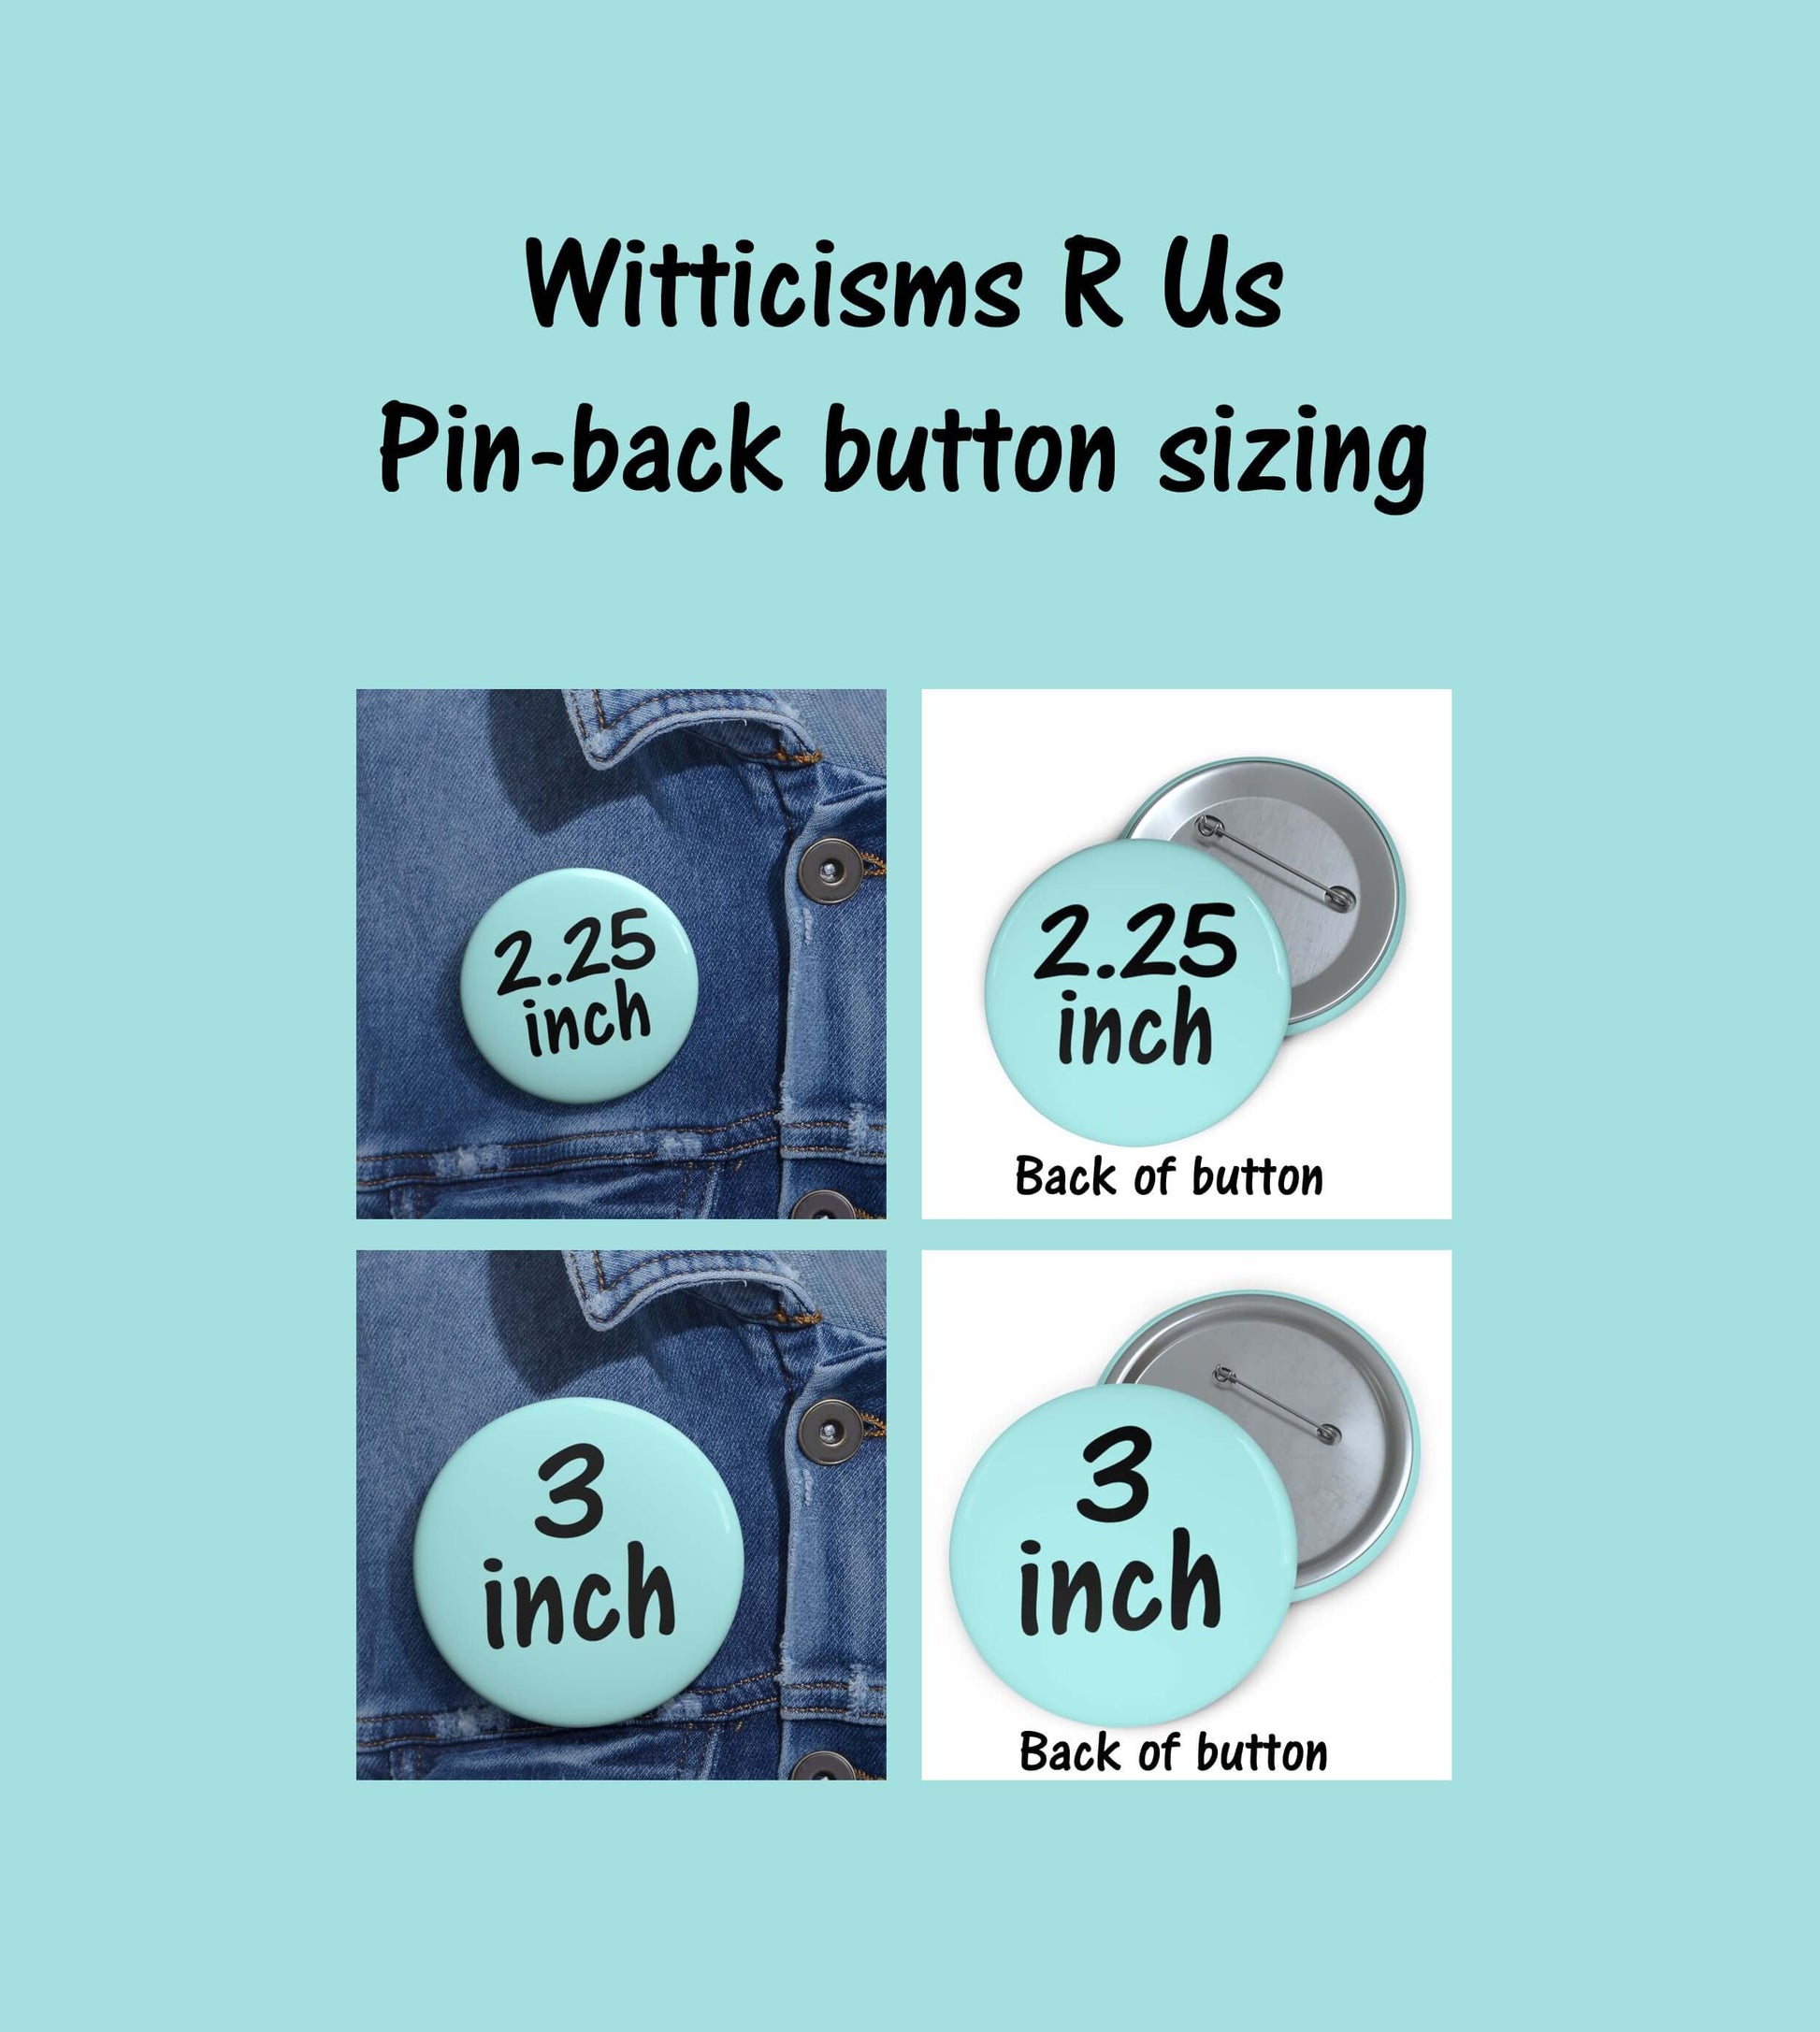 Witticisms r us pinback button infographic.